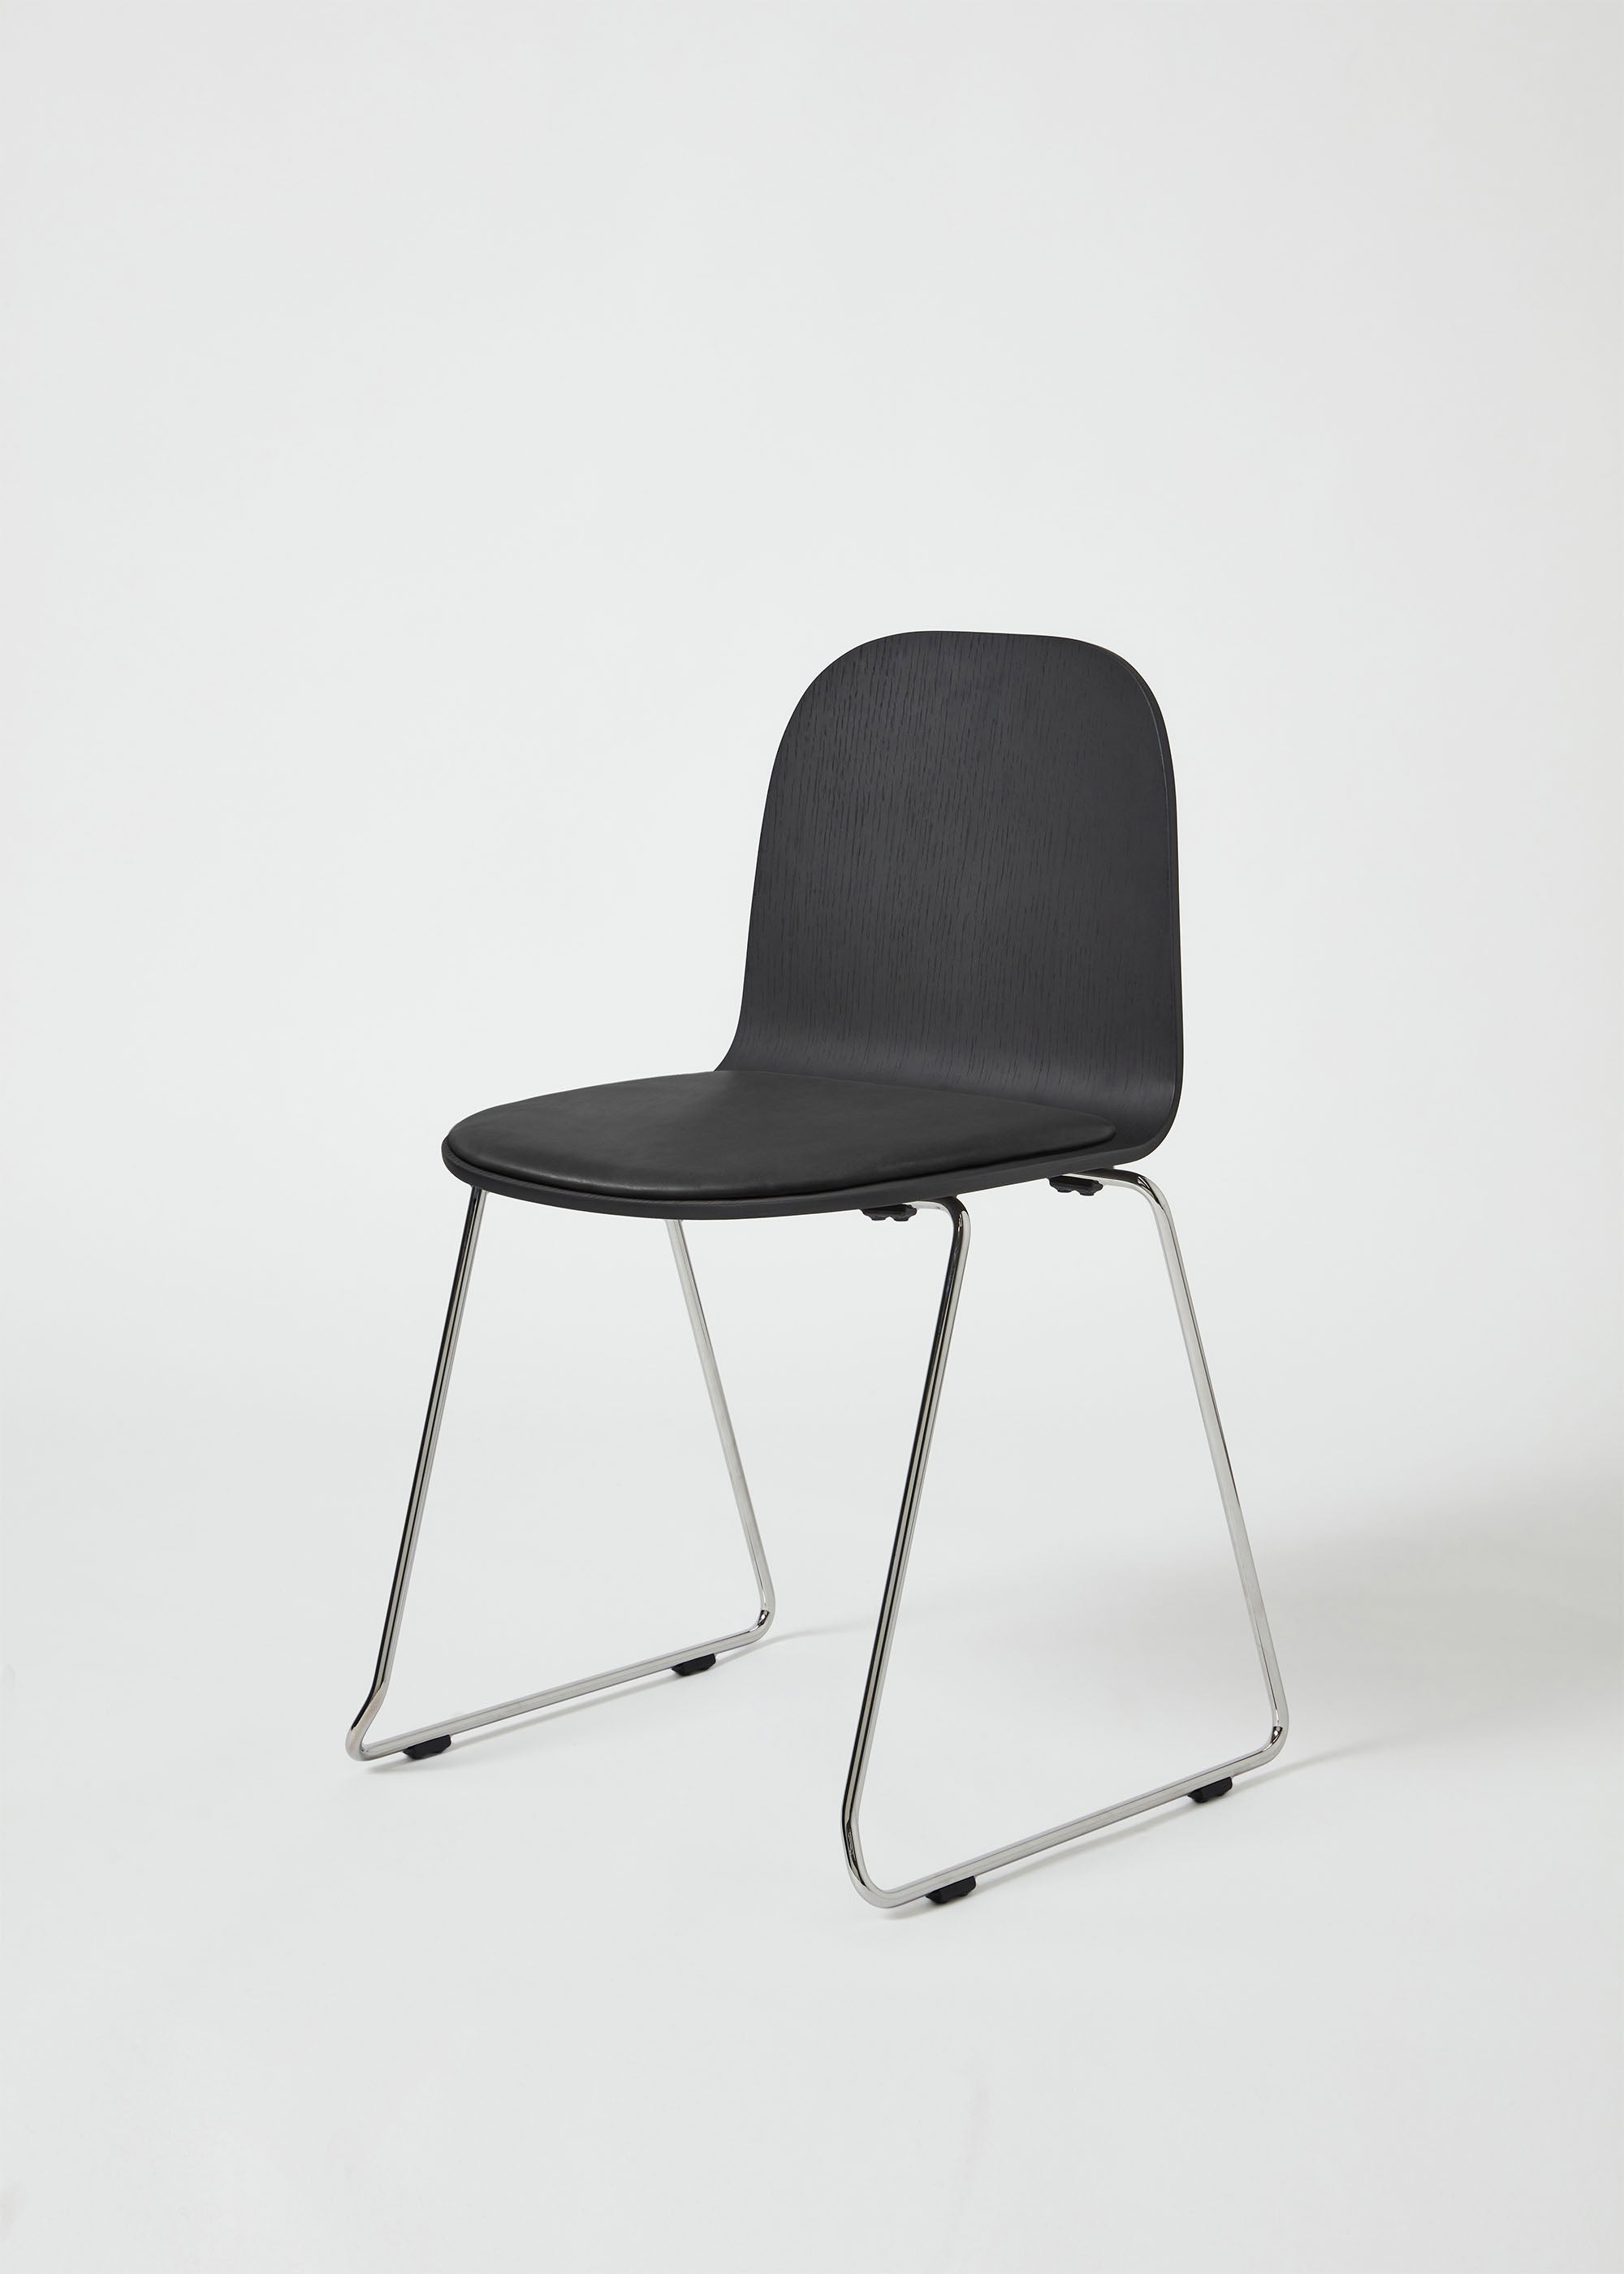 Potato Chair | Stacking Sled Timber & Upholstered Dining Office Chair with Handle | GibsonKarlo | DesignByThem ** HL1 Leather Primary - BA90 Black / HF2 Lariat (Vinyl) - 006 Black